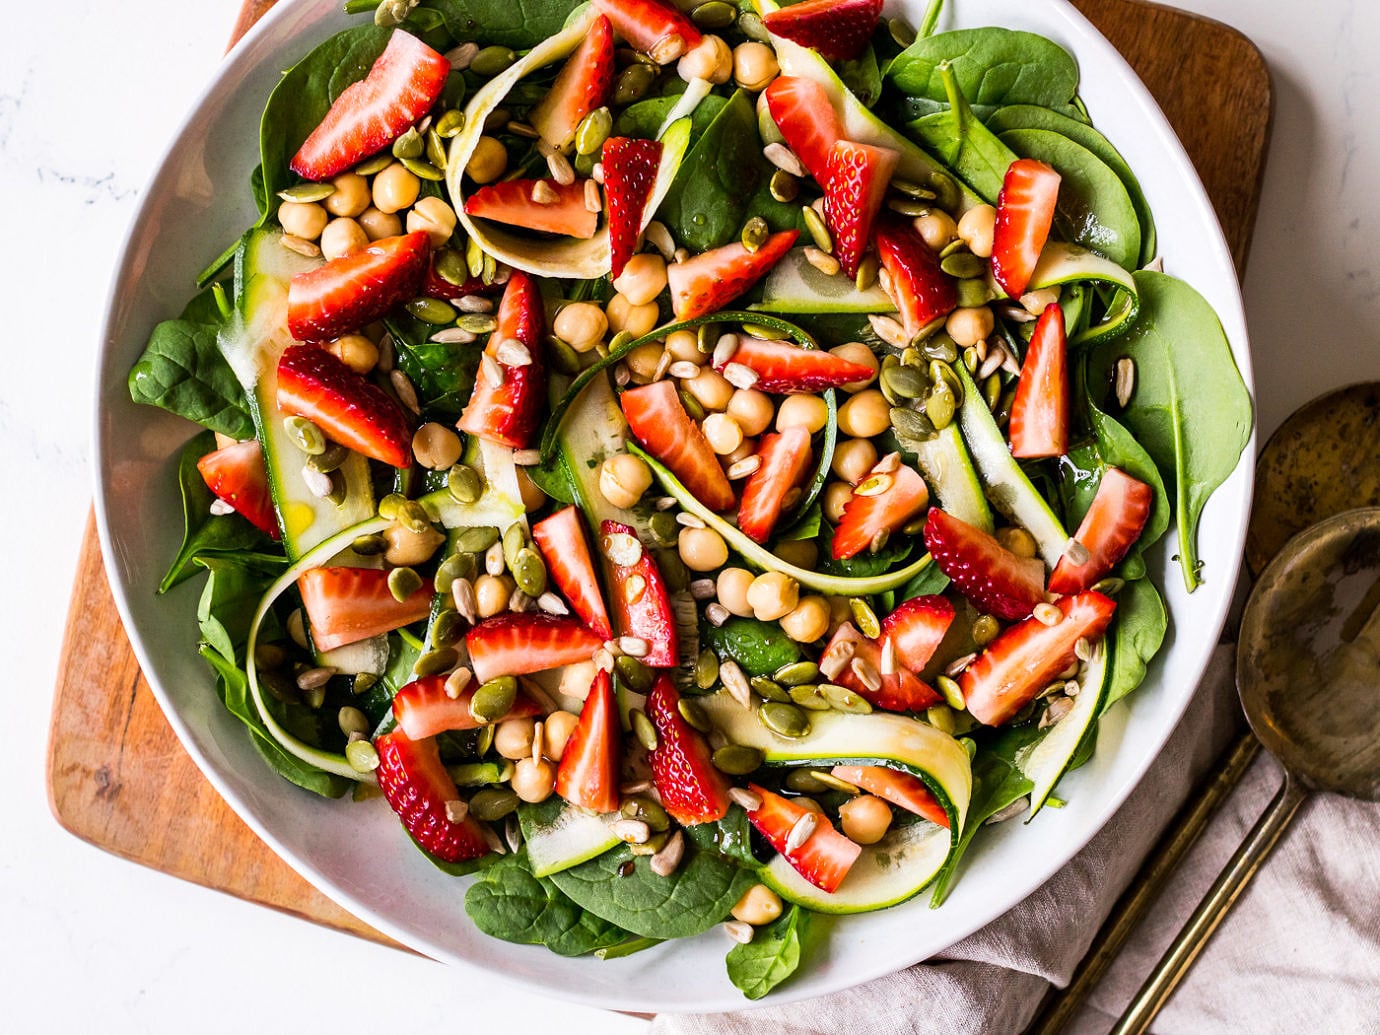 Balsamic Strawberry and Spinach Salad Recipe by Nourish Every Day Blog